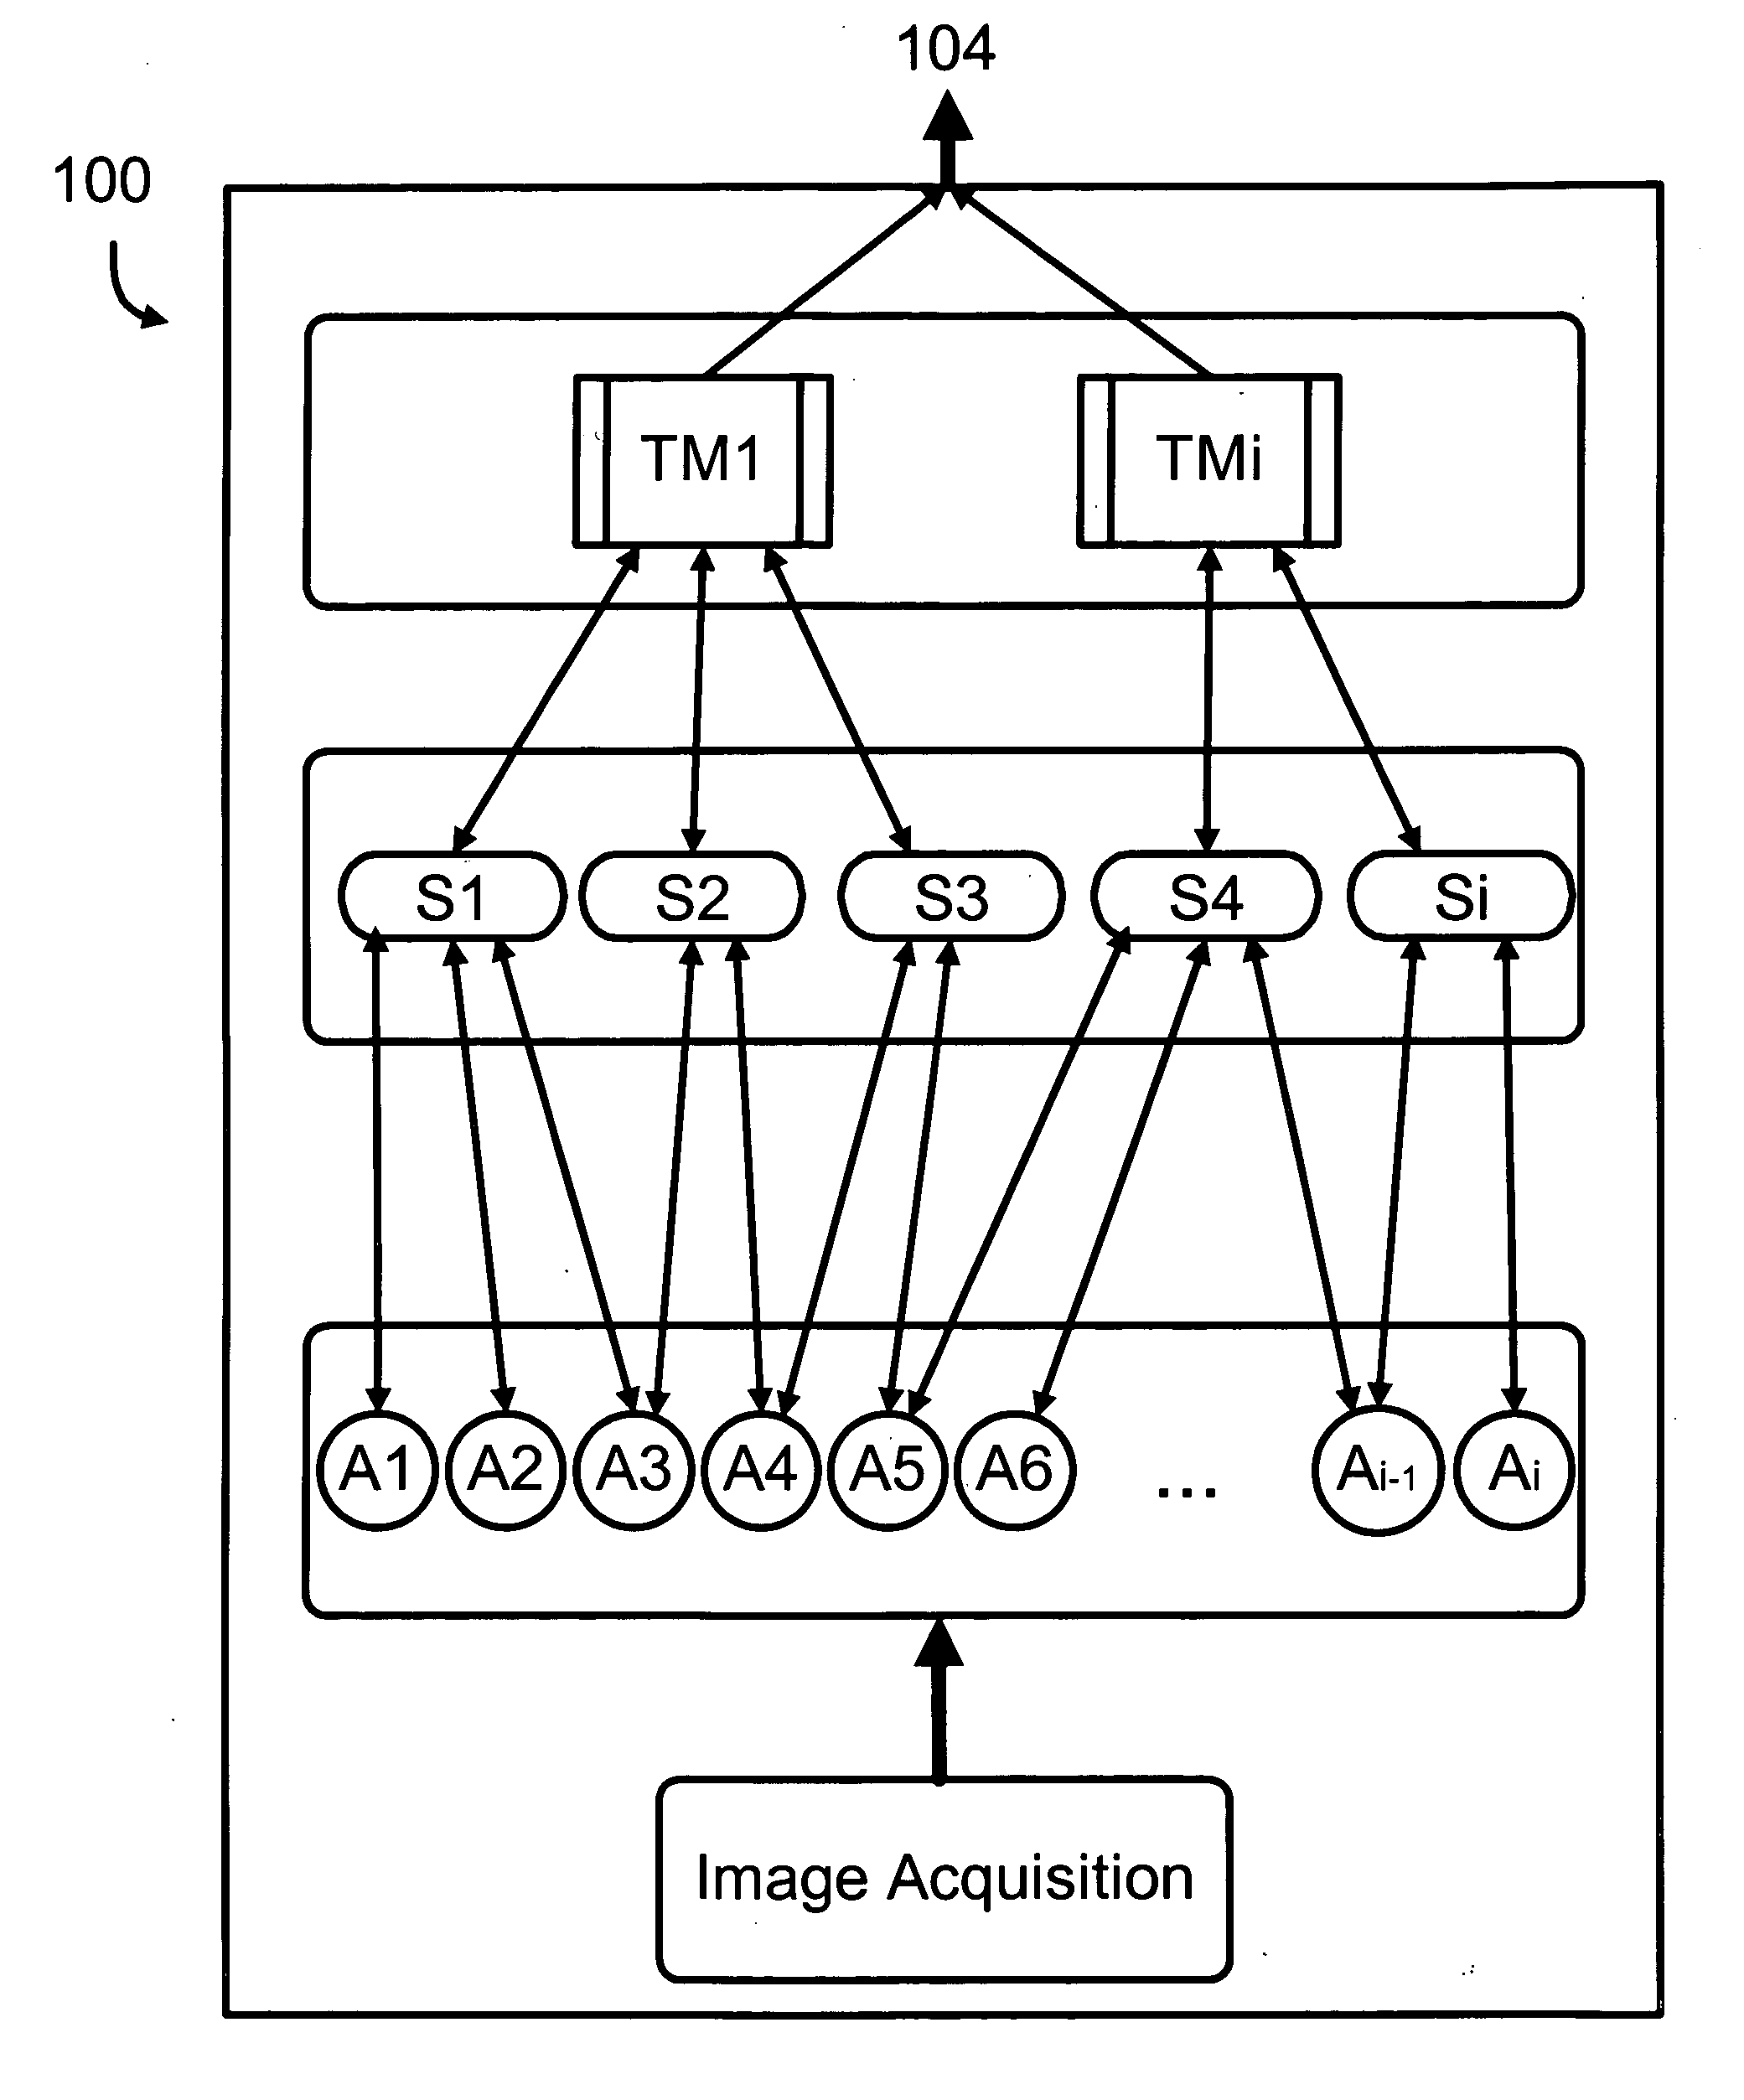 Image-based vehicle occupant classification system